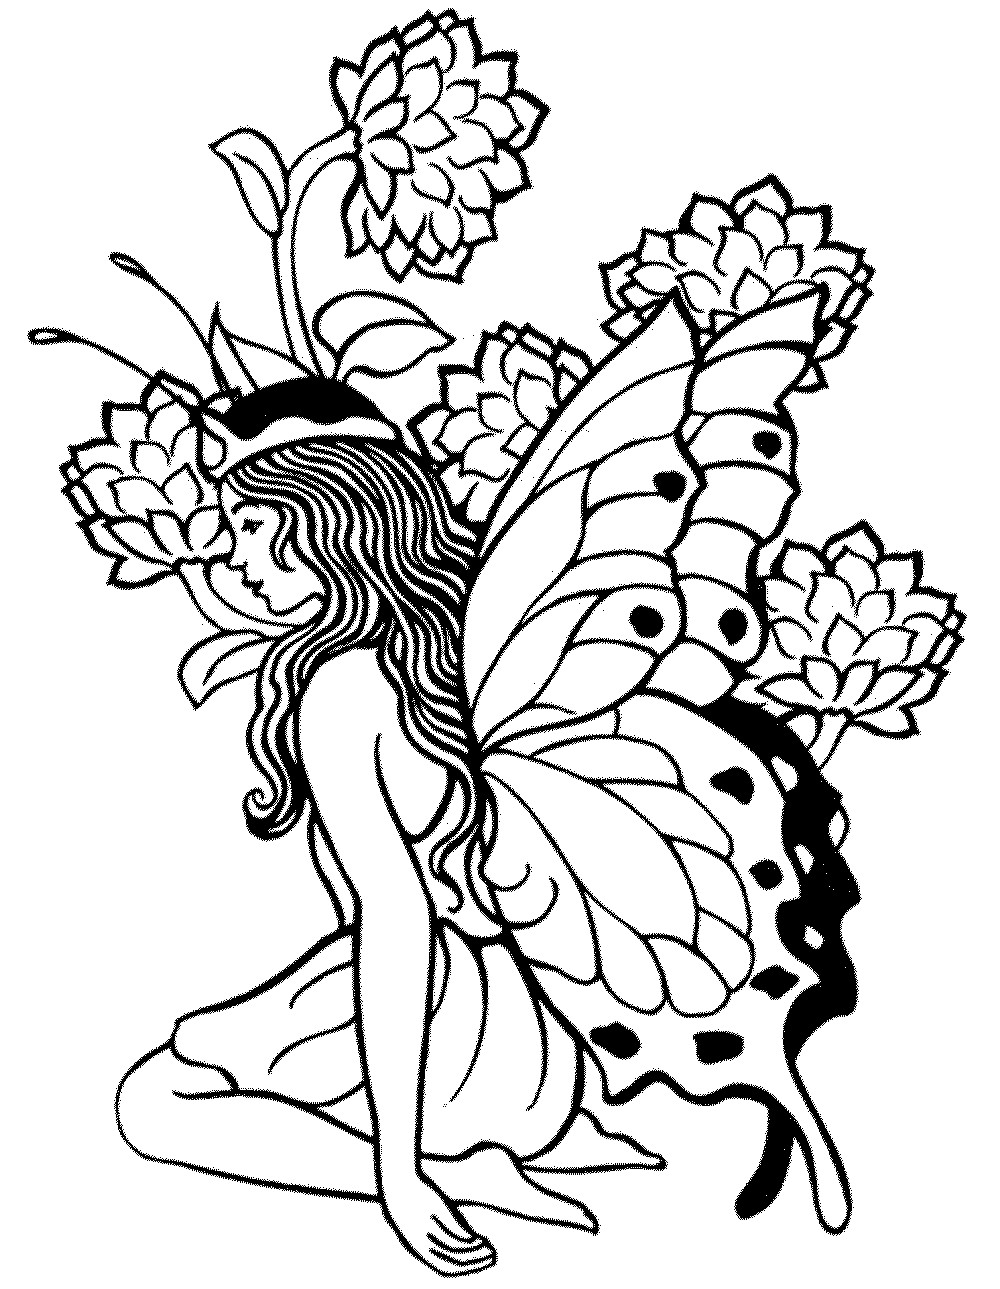 Coloring Pages For Adults Printable
 Free Coloring Pages For Adults Printable Detailed Image 23